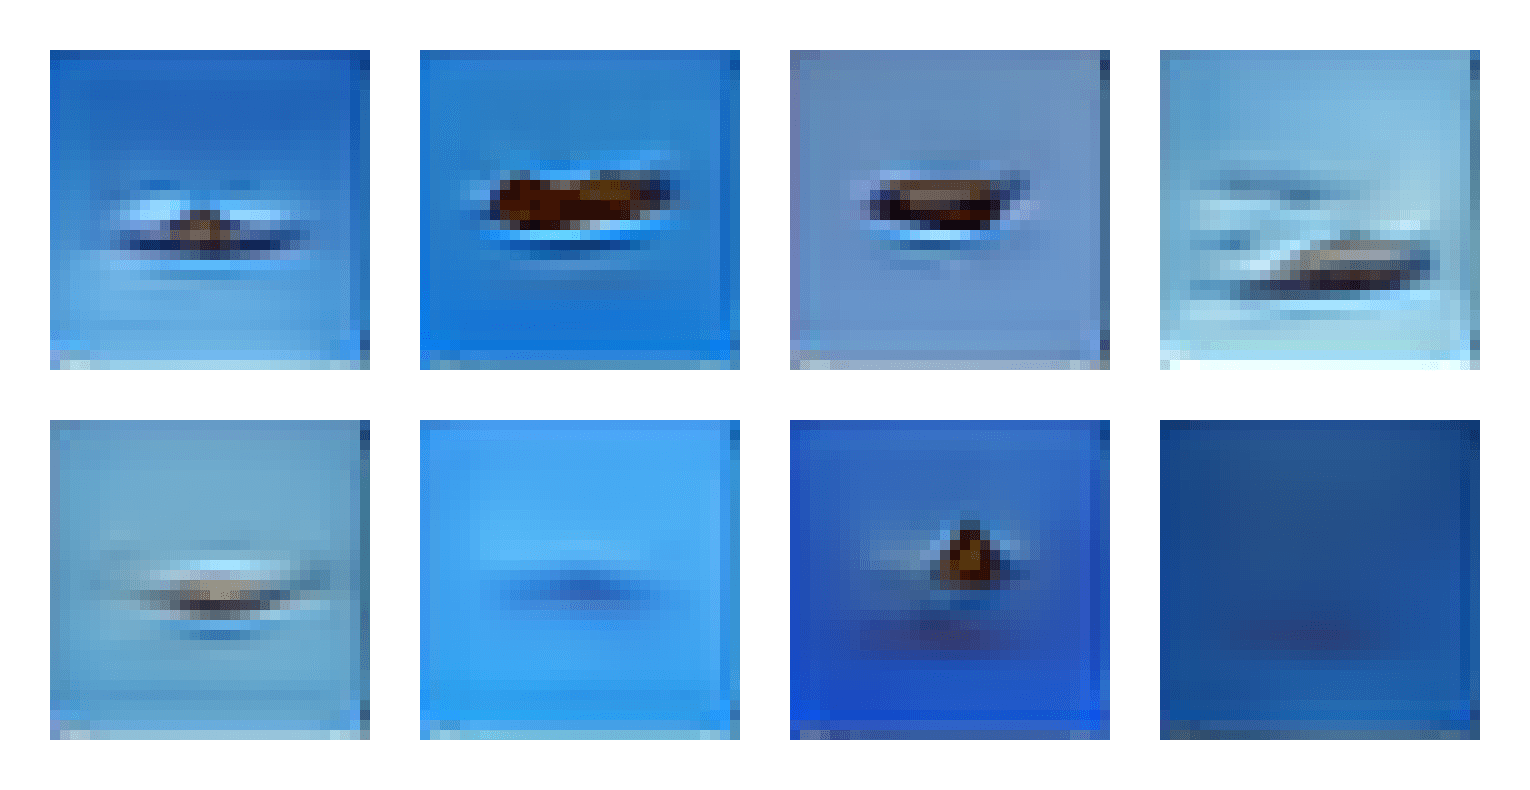 A set of 8 images created from the alignDRAW model based on the prompt “A very large commercial plane flying in blue skies”. (Image credit: Fellowship)